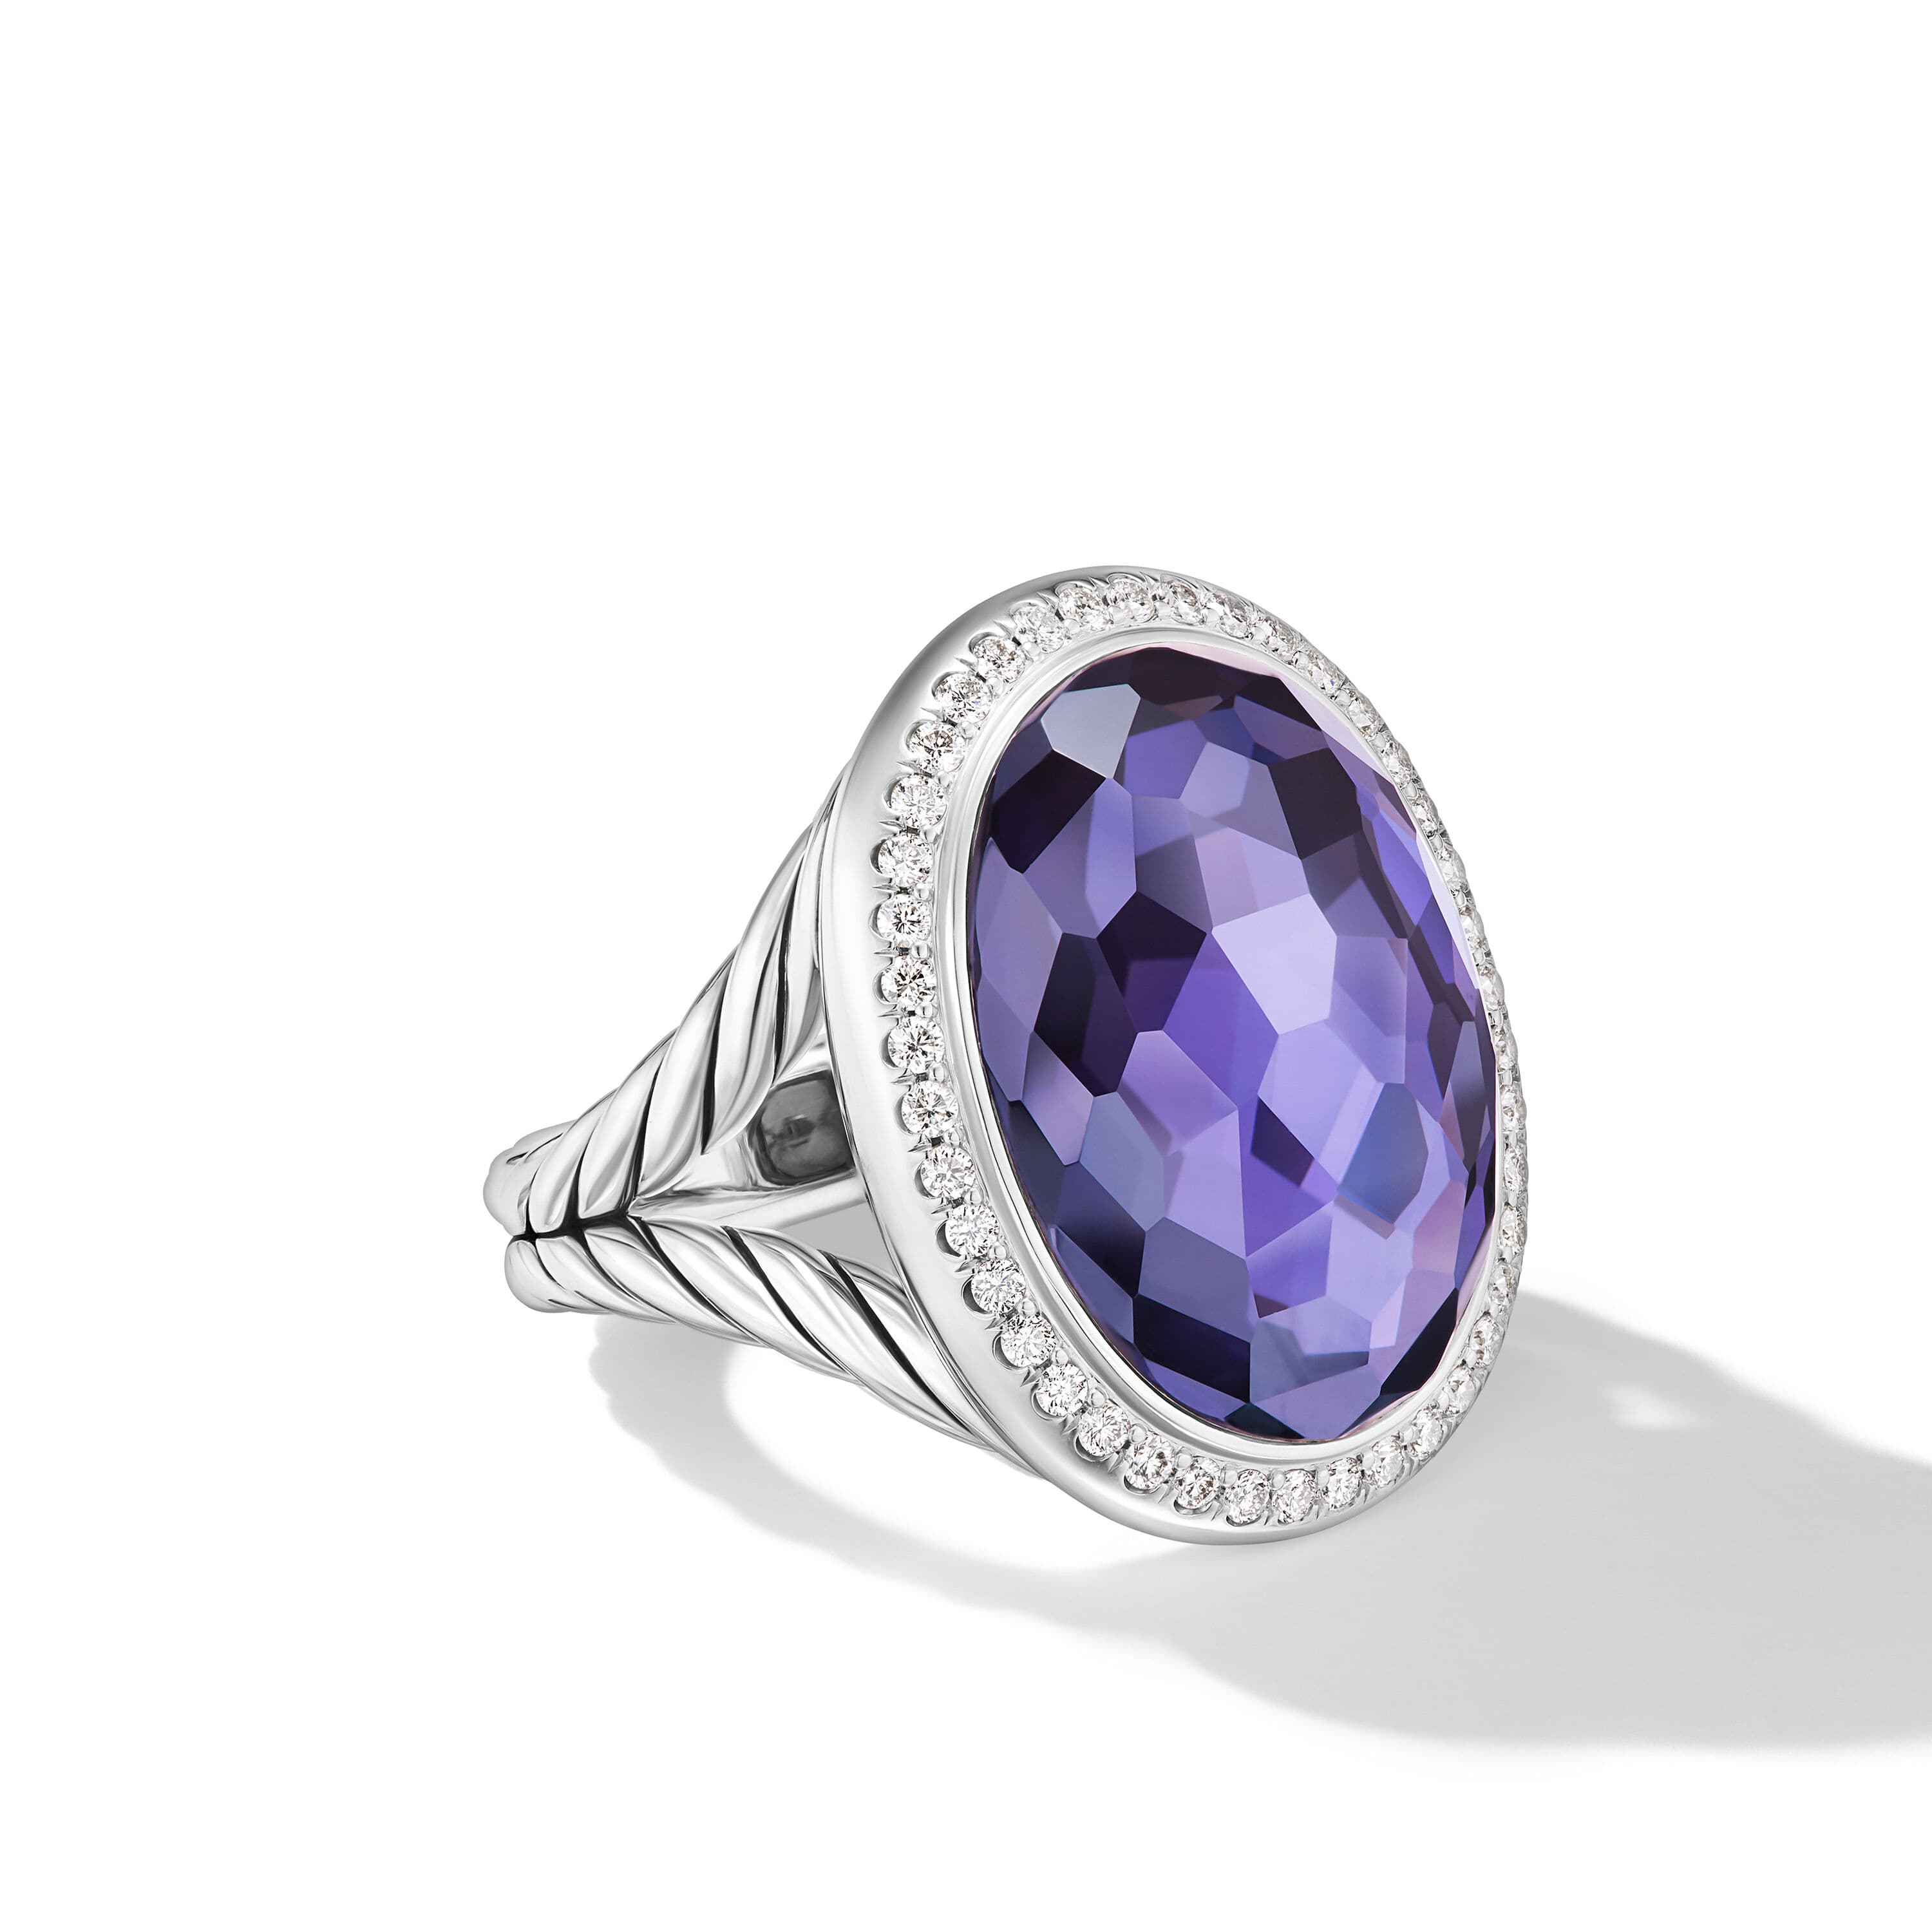 David Yurman Albion Oval Ring in Sterling Silver with Black Orchid and Diamonds 0